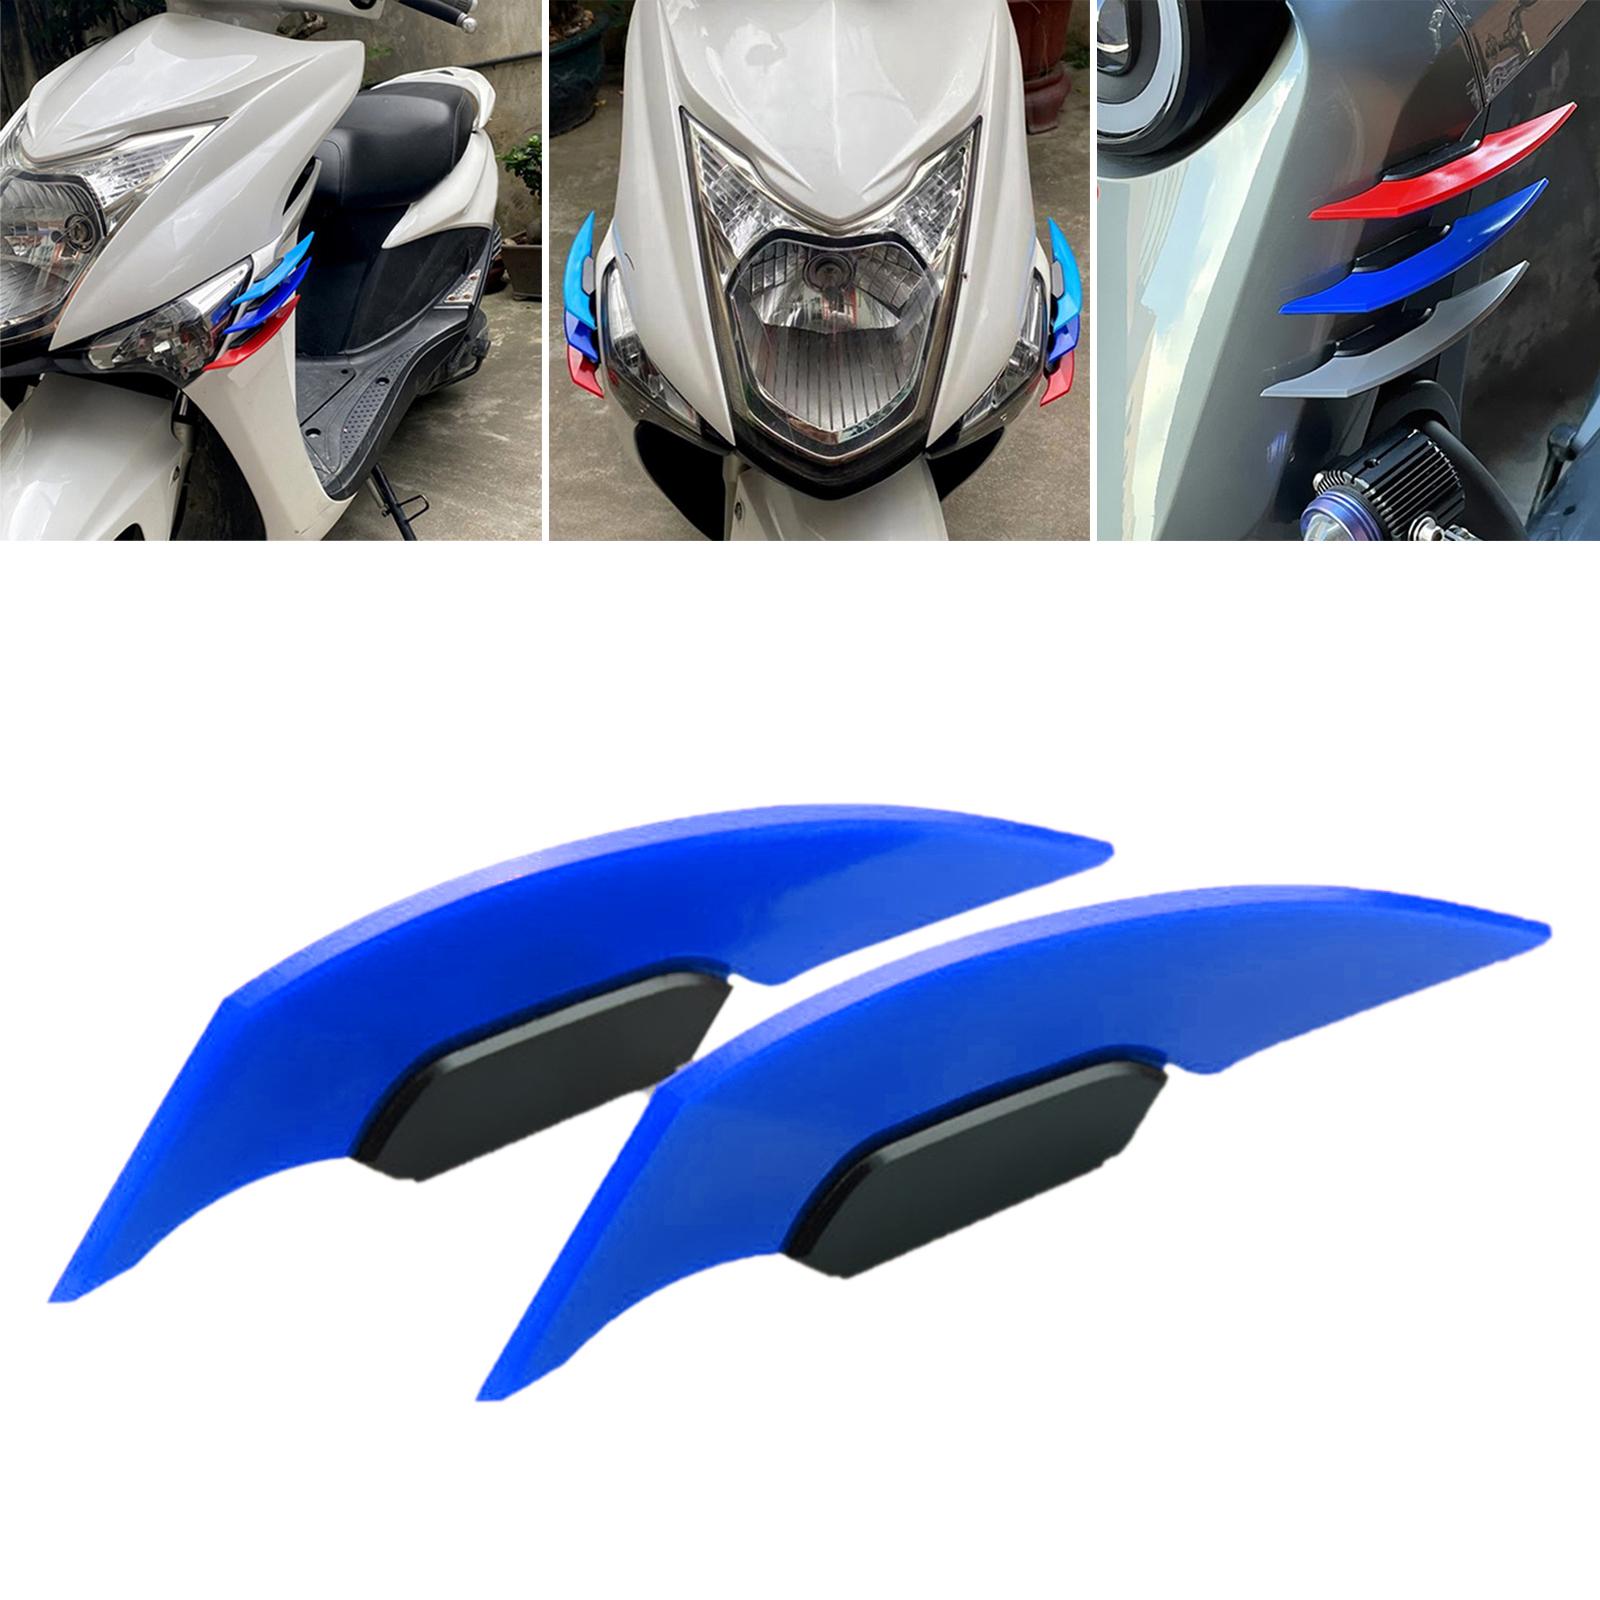 Motorcycle Winglet Aerodynamic Spoiler Wing Fit for Electric Motorcycles Blue